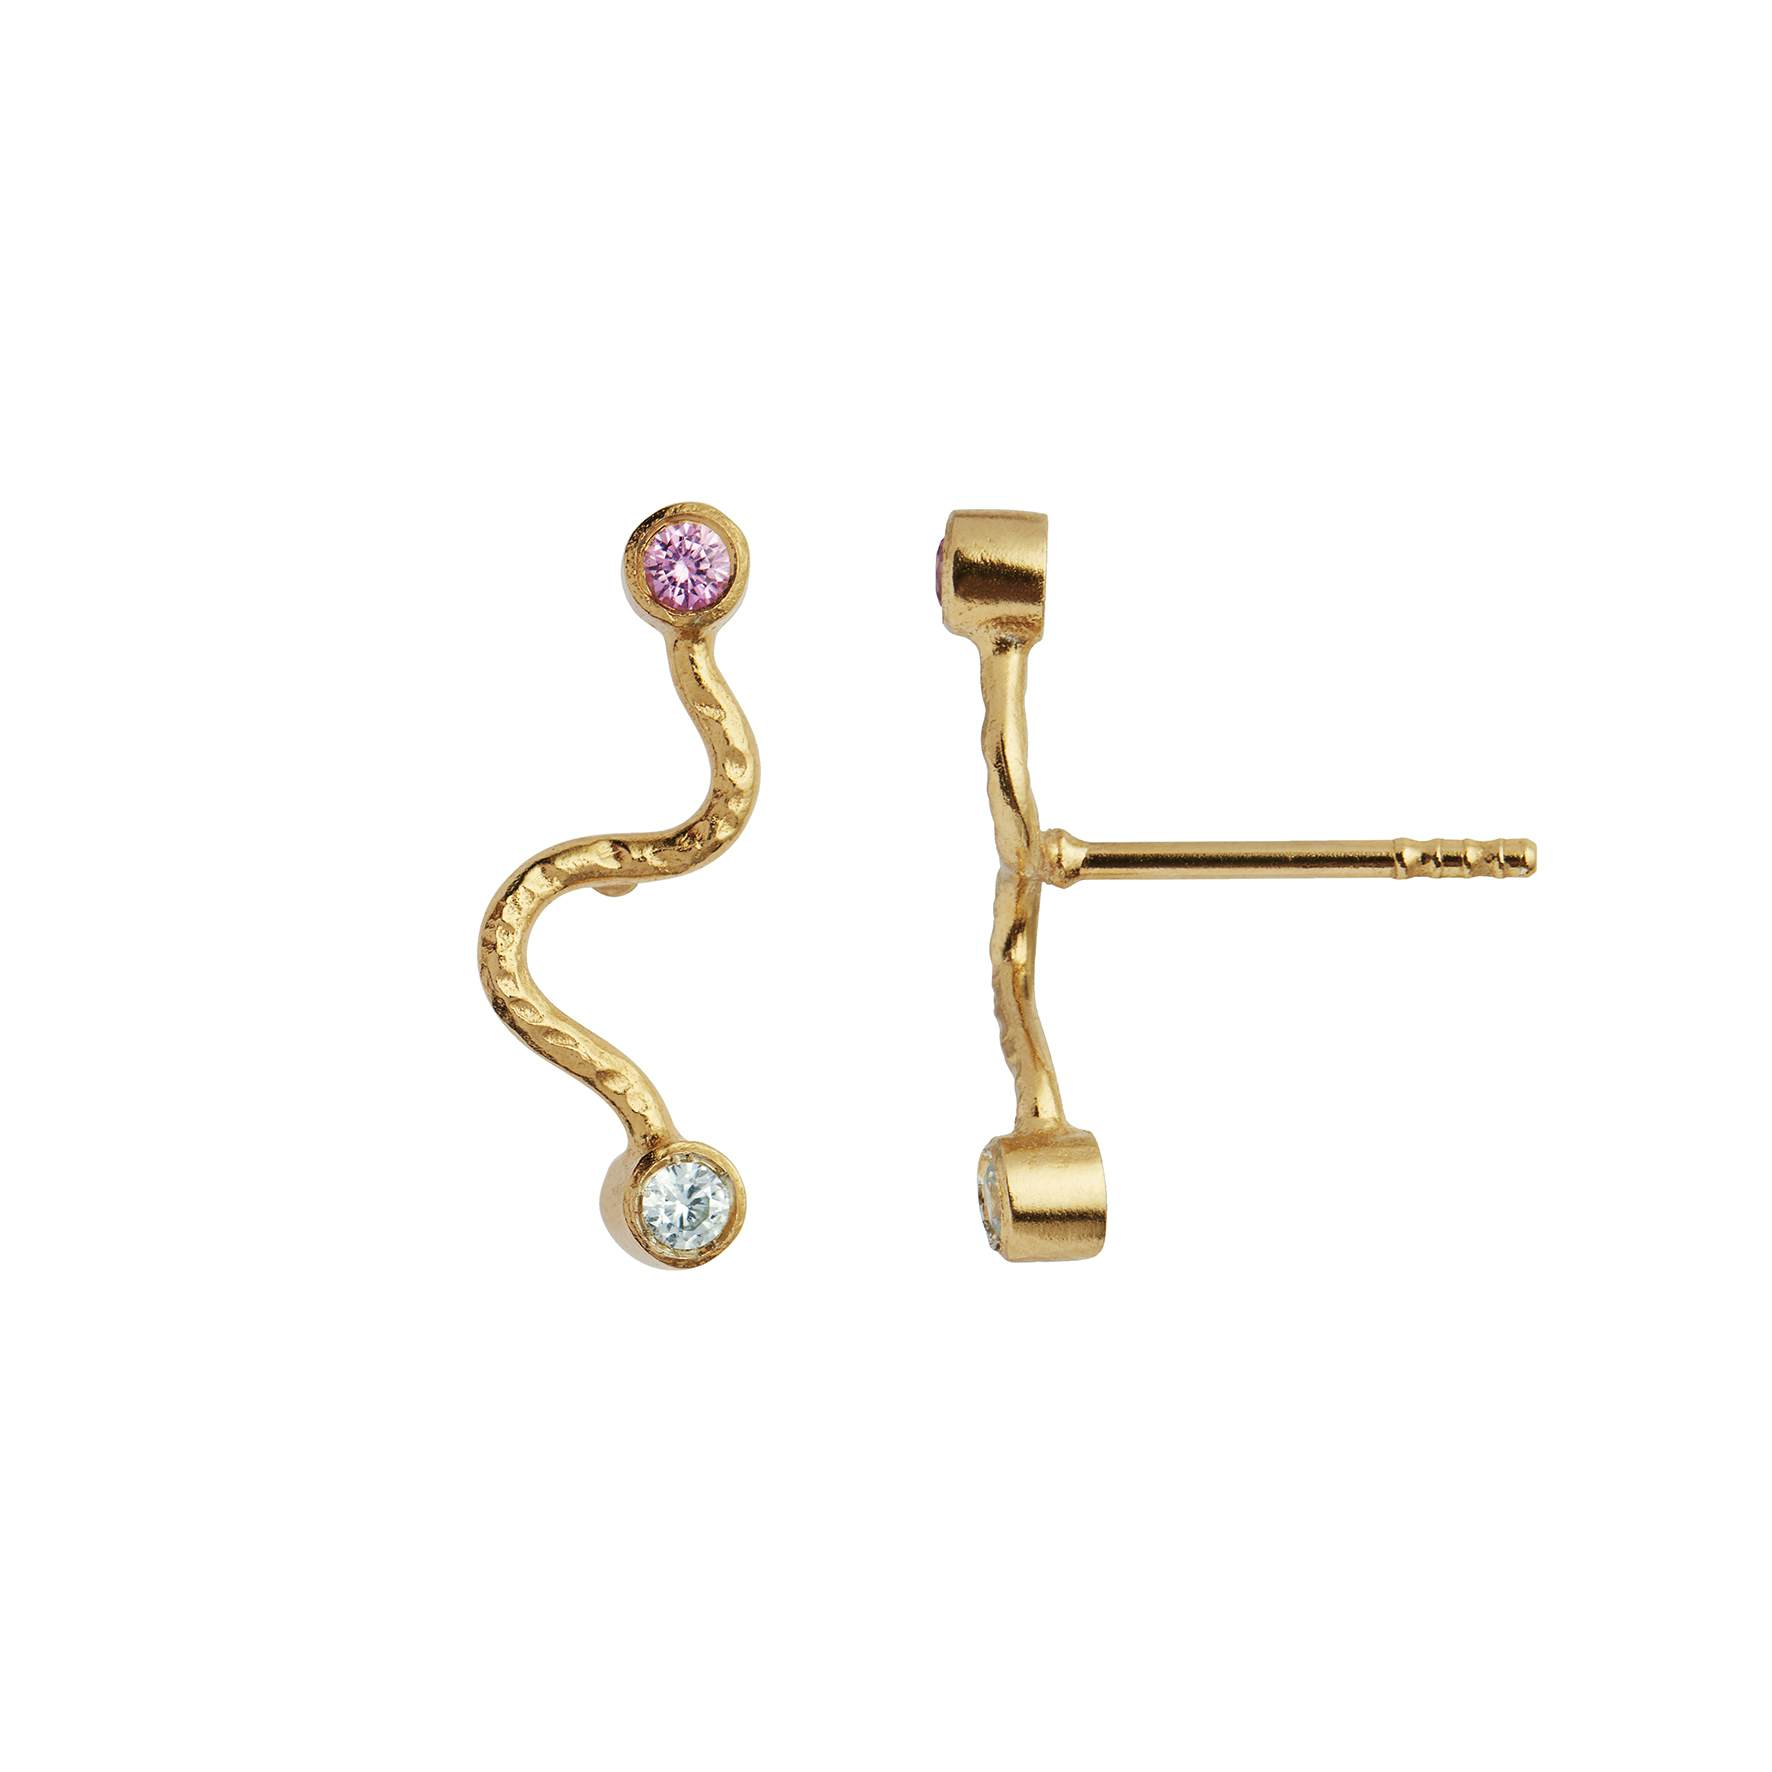 Big Wave Earstick With Pastel Pink & Blue Stones from STINE A Jewelry in Goldplated-Silver Sterling 925